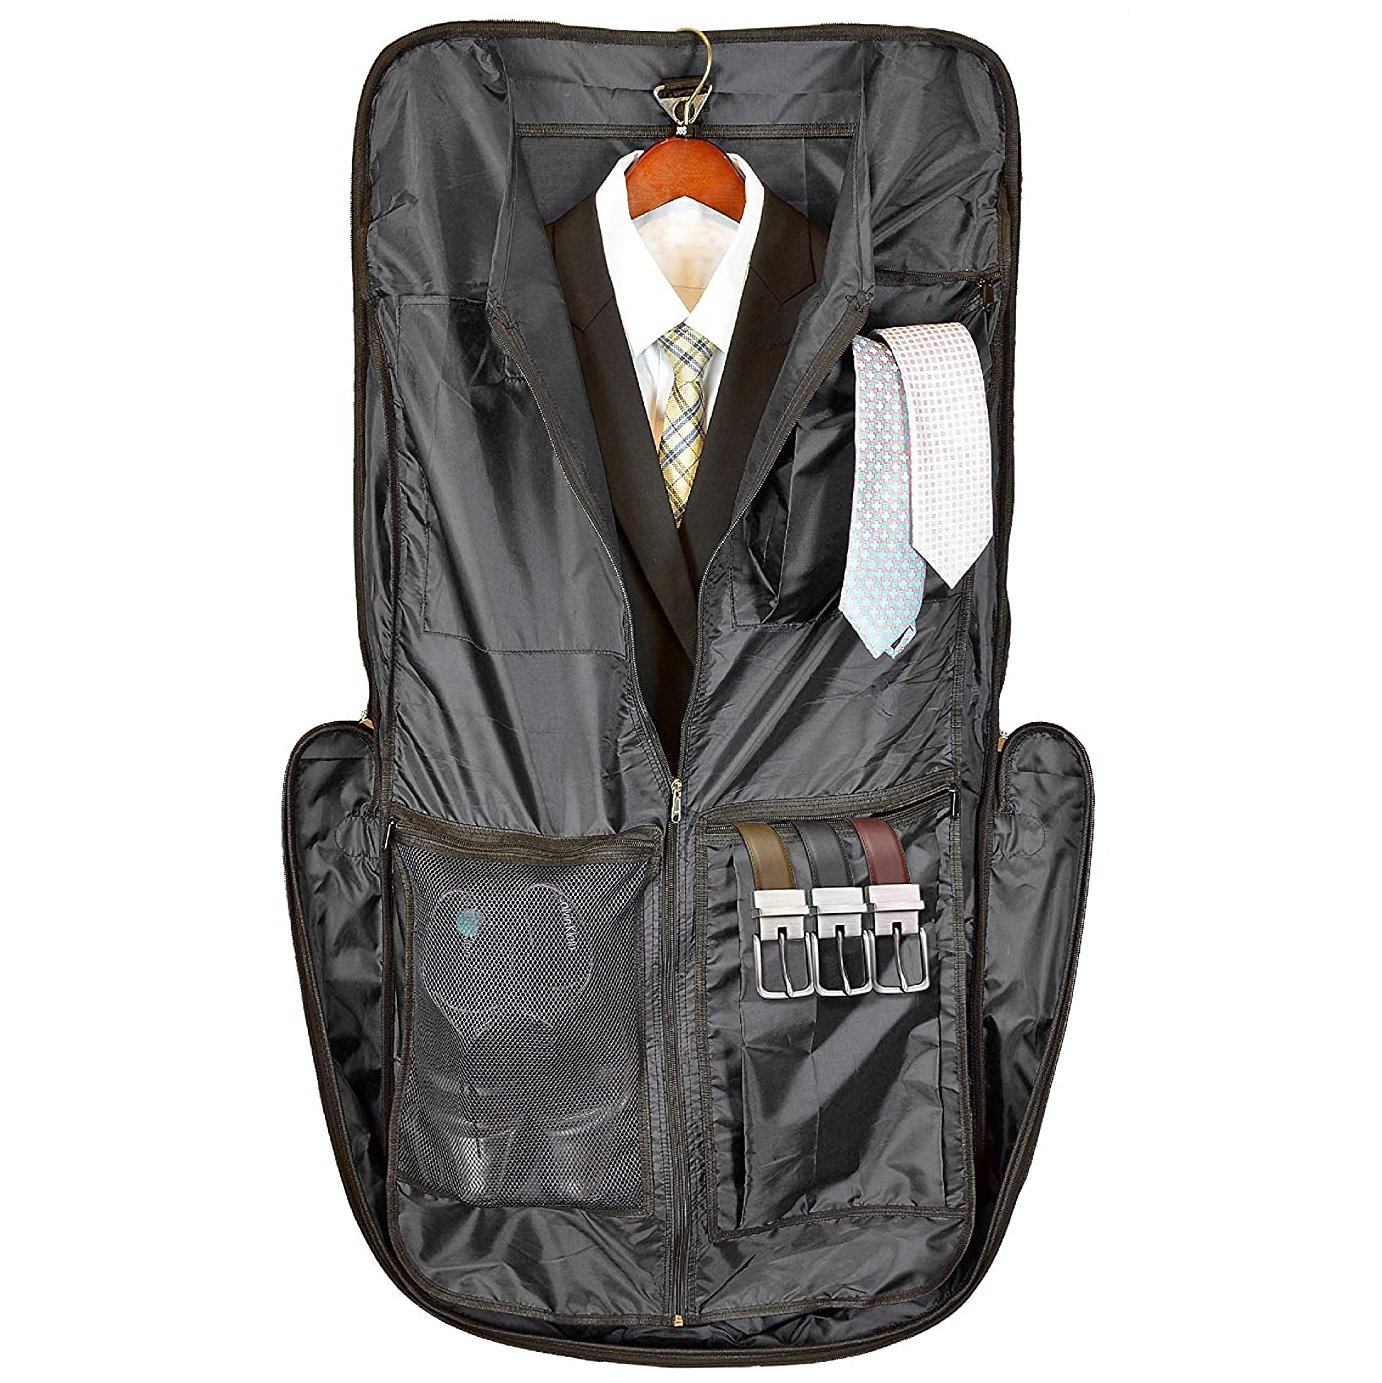 Bolford Travel Garment Bag For Business Trips And Travel With Padded Computer Pocket / Black